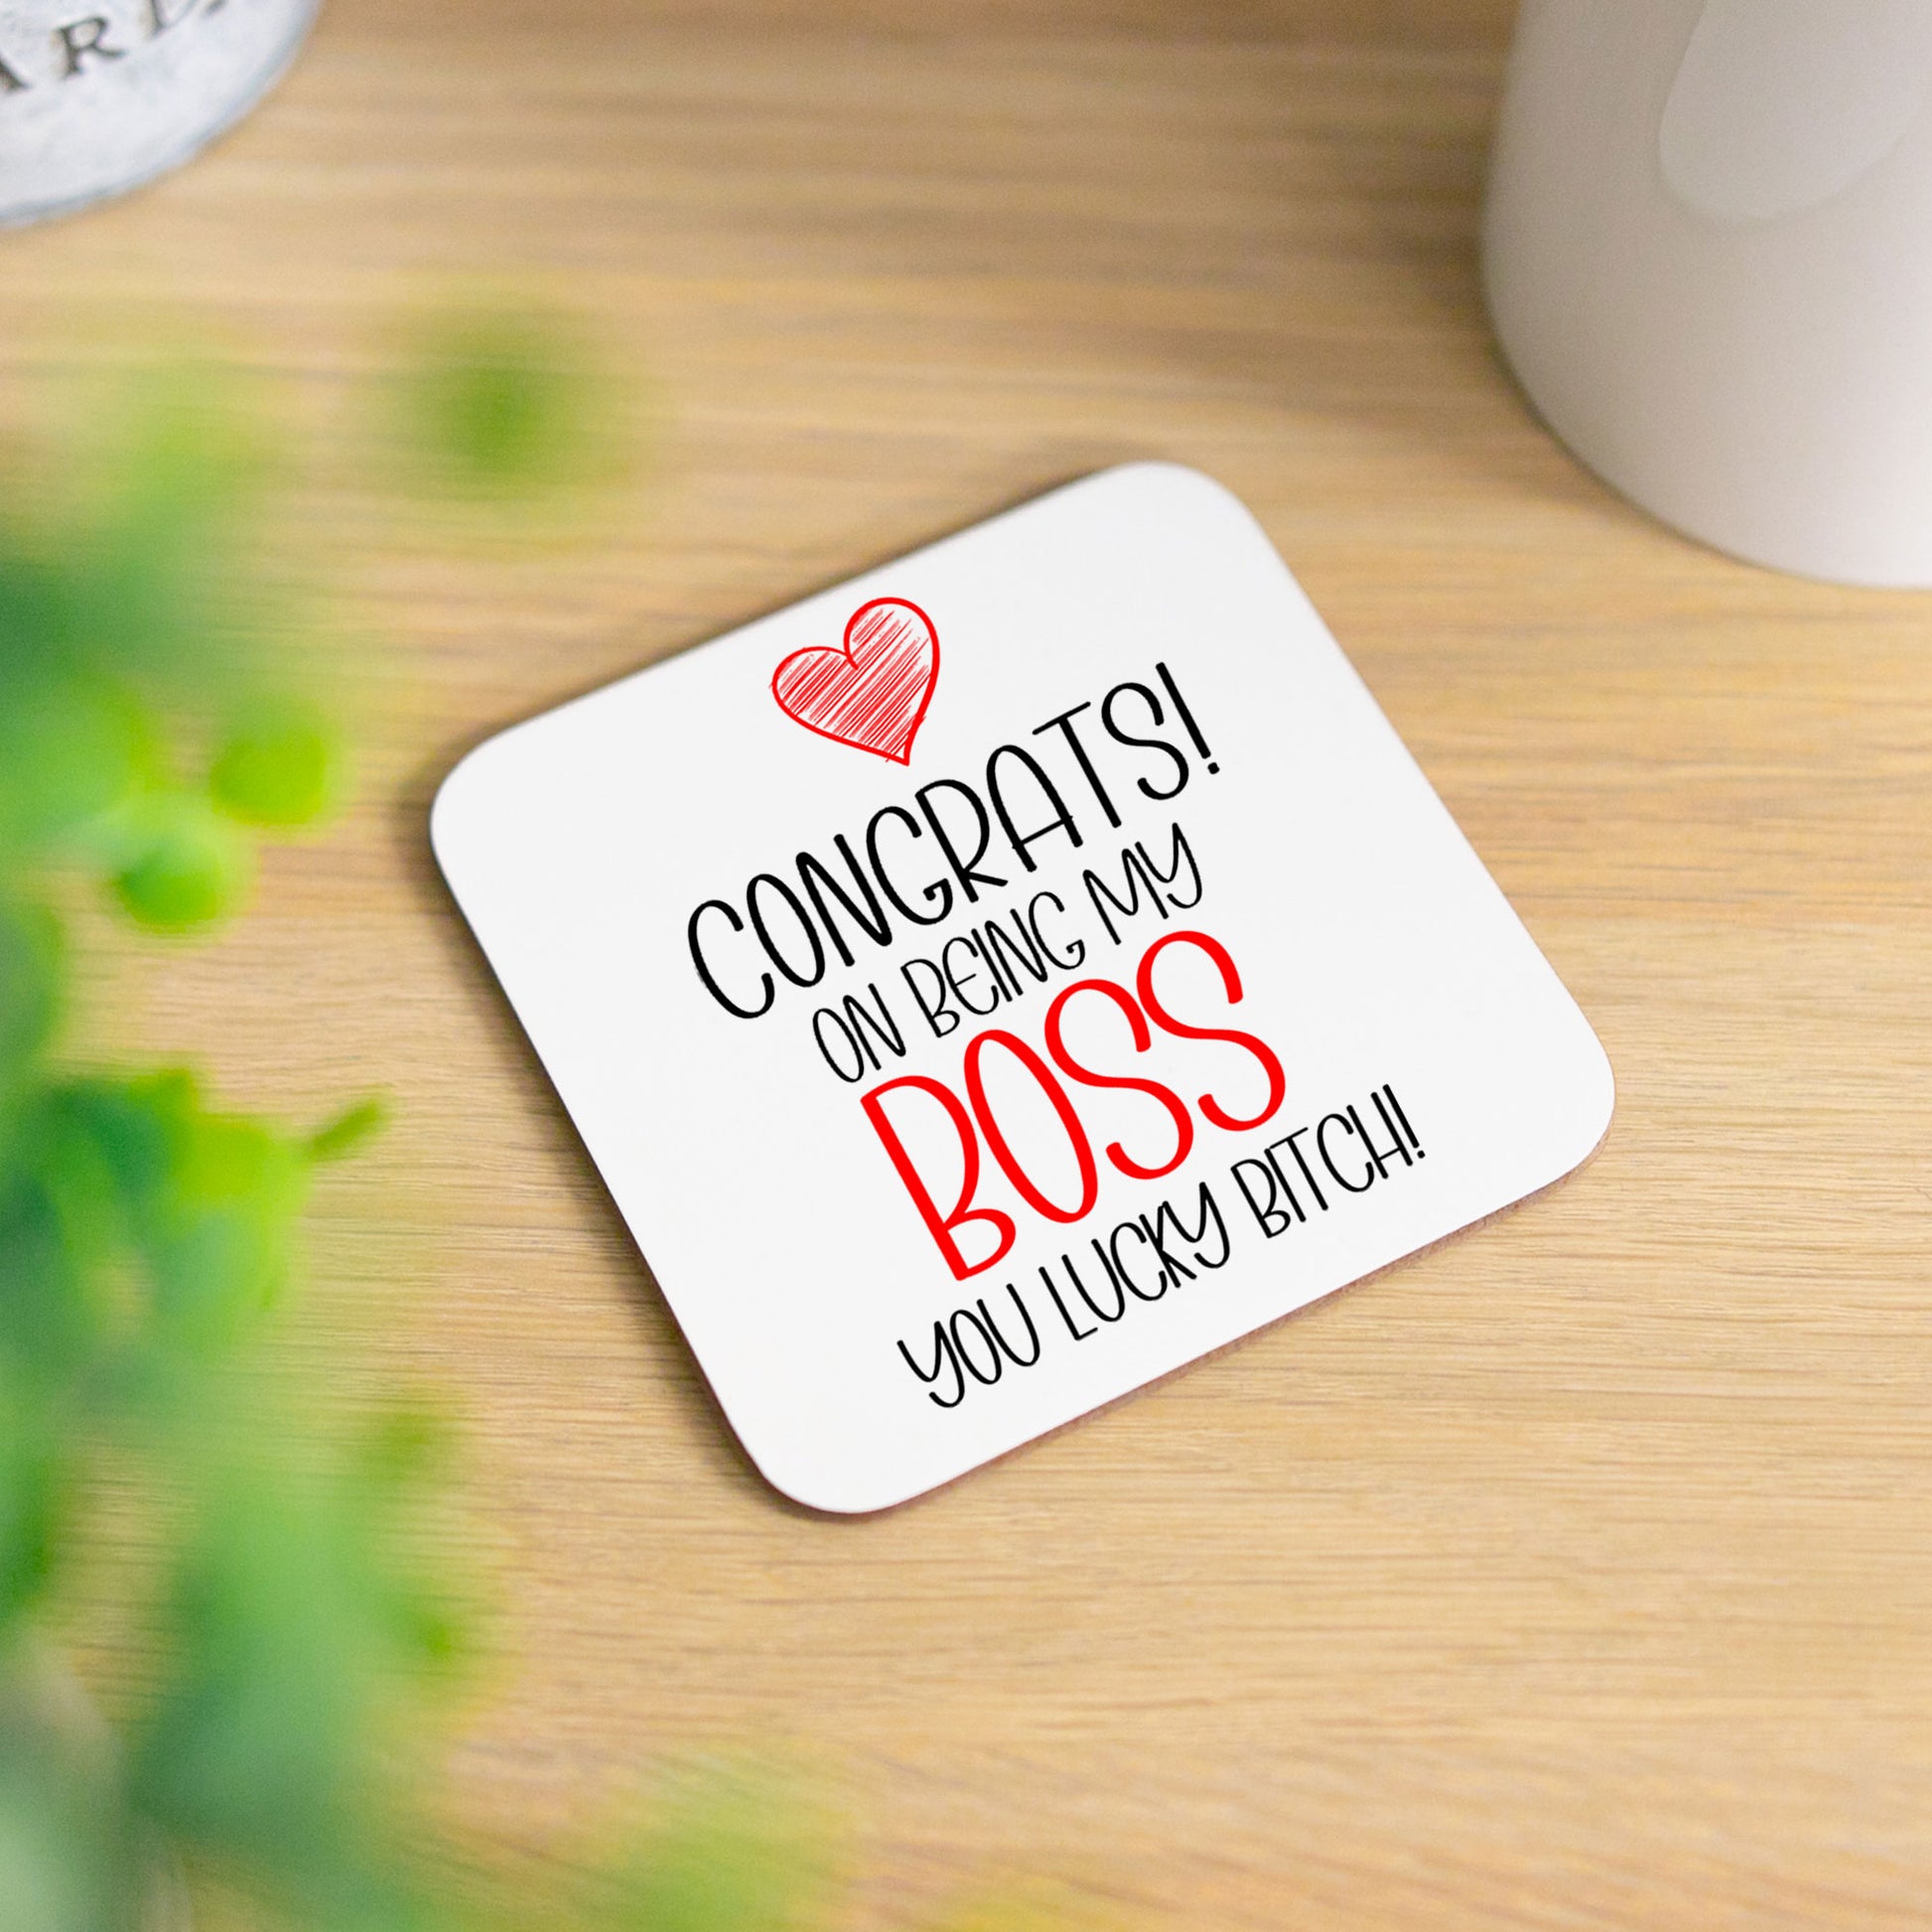 Congrats On Being My Boss Mug and/or Coaster Gift  - Always Looking Good - Lucky Bitch Coaster On Its Own  